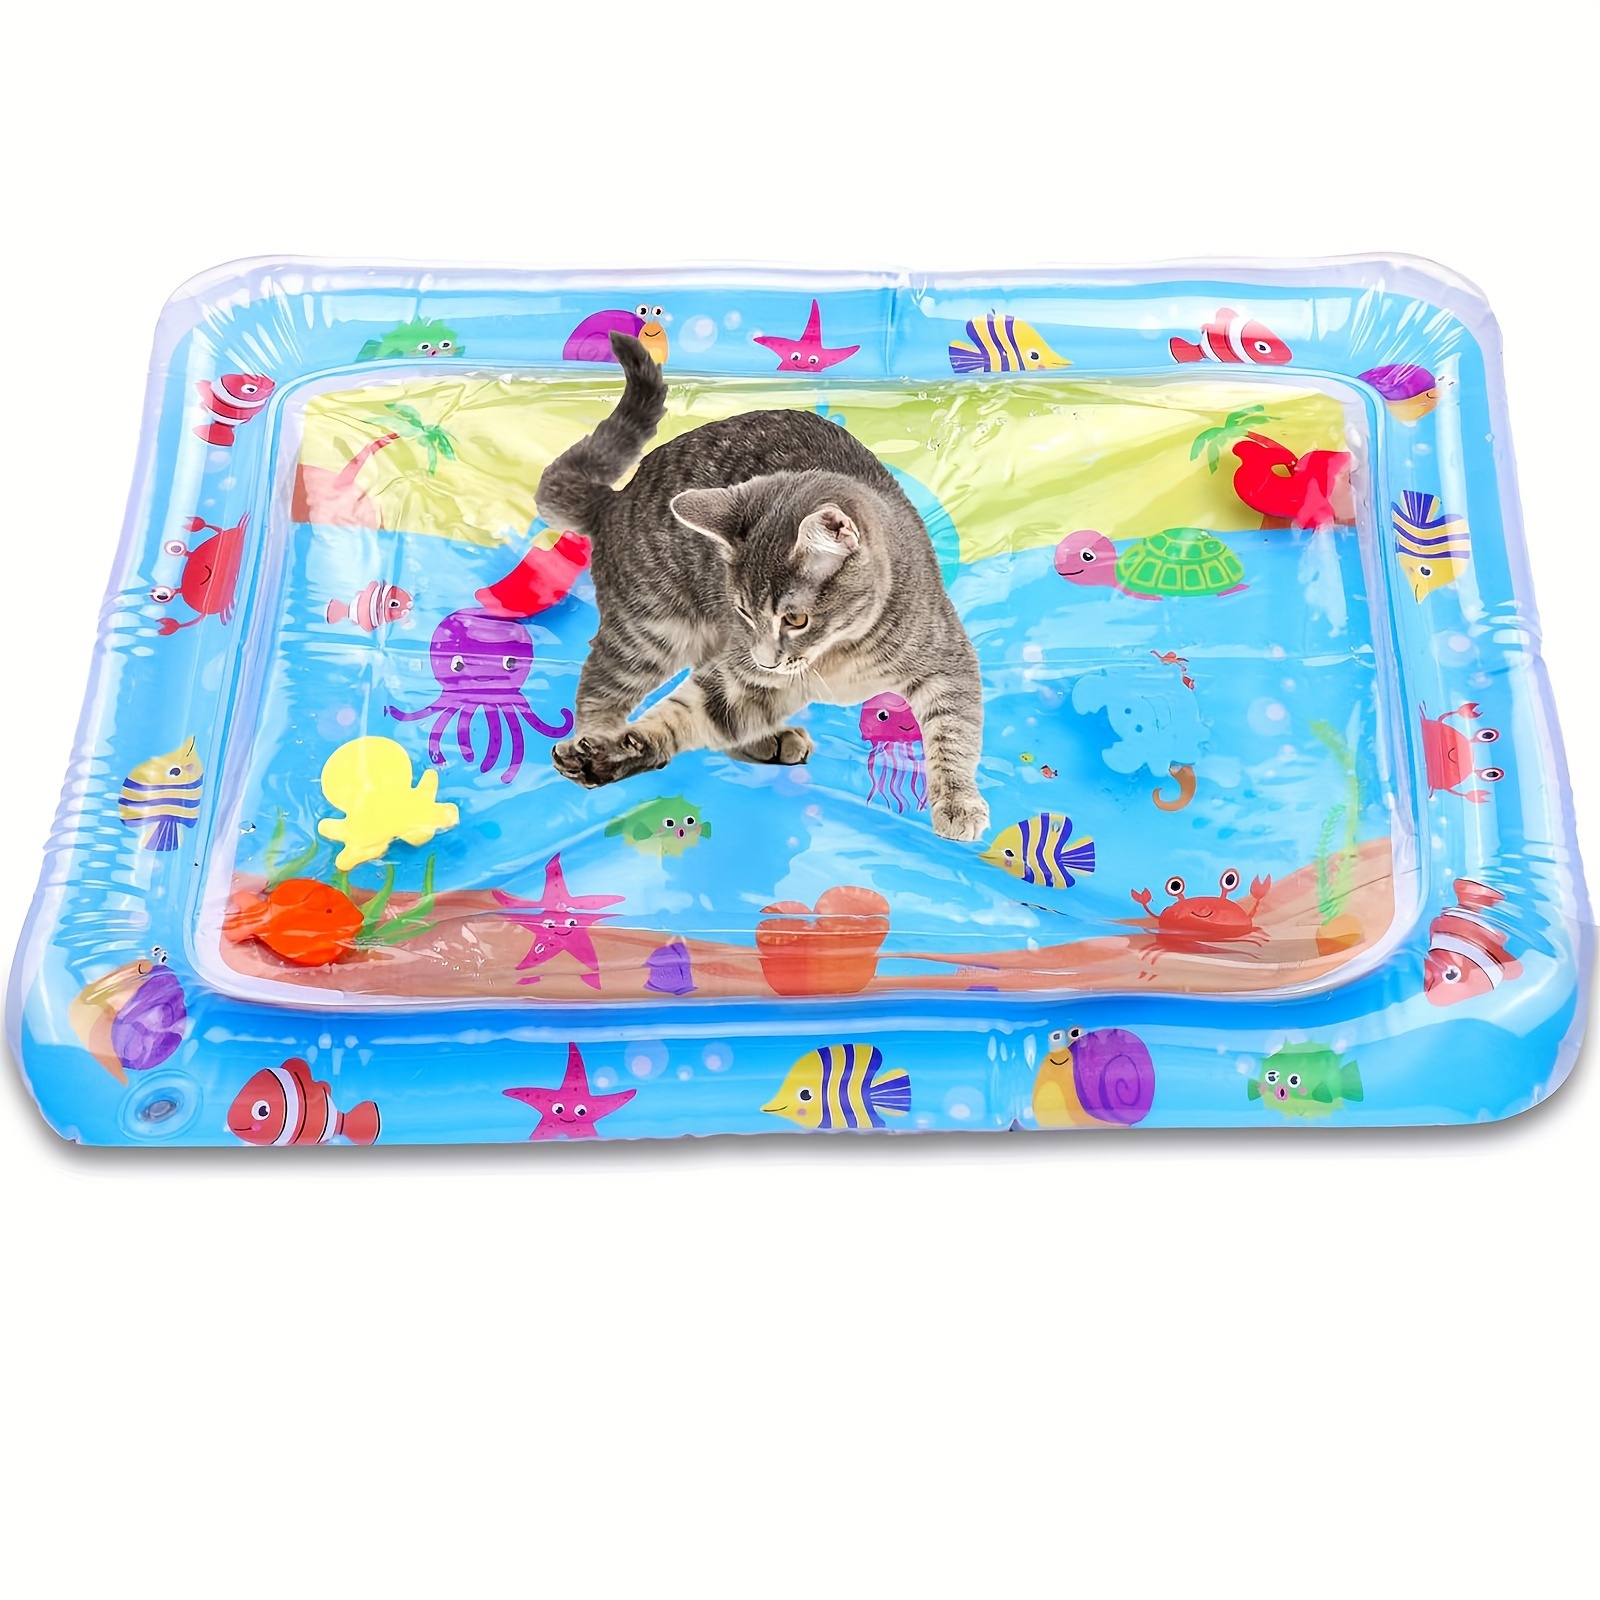 

Deluxe Thick Water Play Mat For Cats - Upgraded, Non-electric Pvc Cat Toy With Ocean Motifs For Indoor Fun Cat Toy Fish Water Cat Water Toy